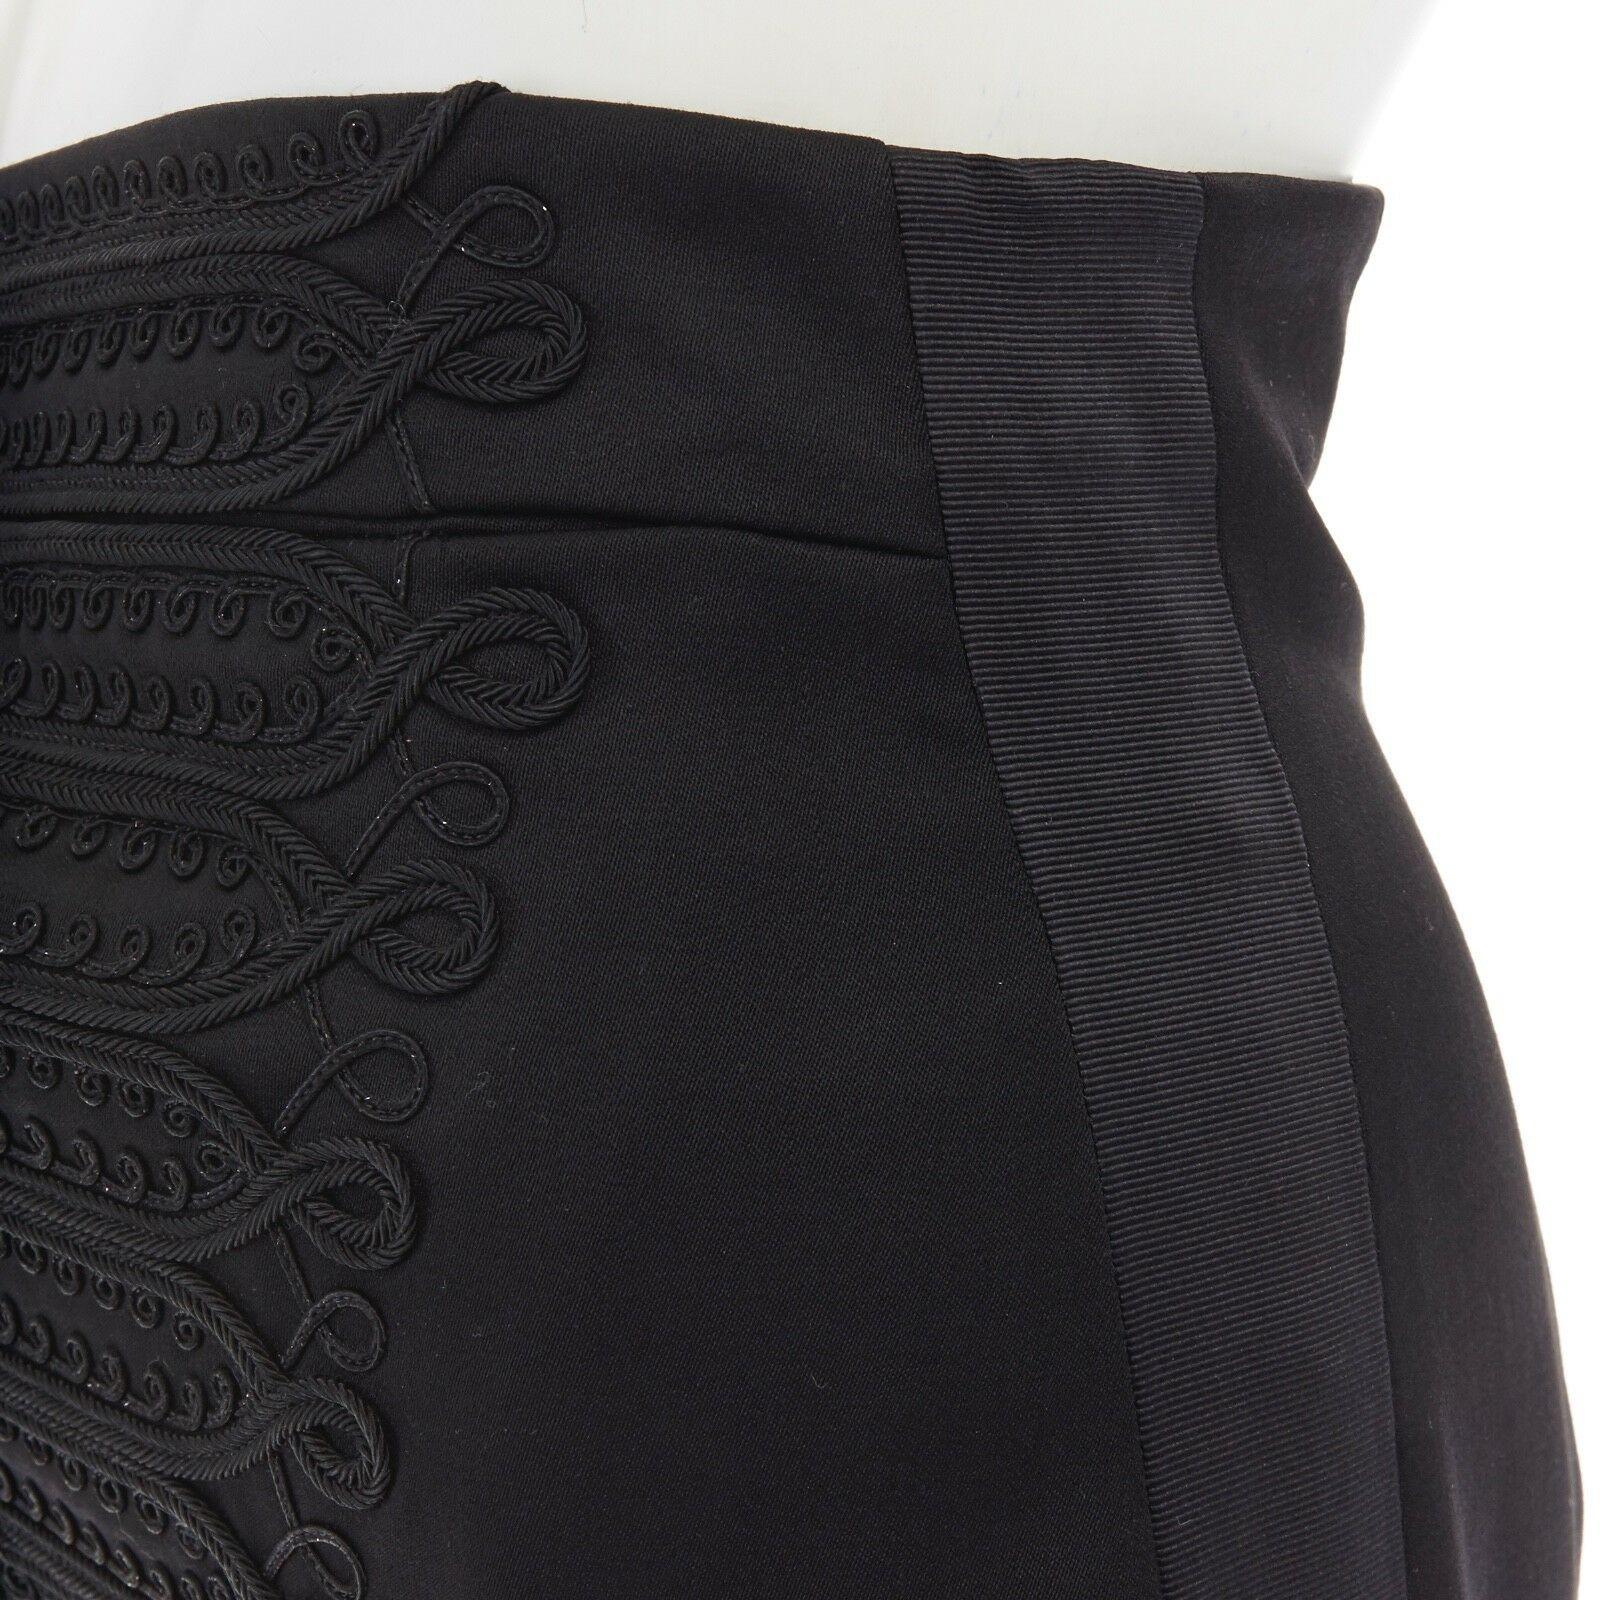 ALEXANDER MCQUEEN Vintage 2008 black military embroidered pencil skirt IT38 26